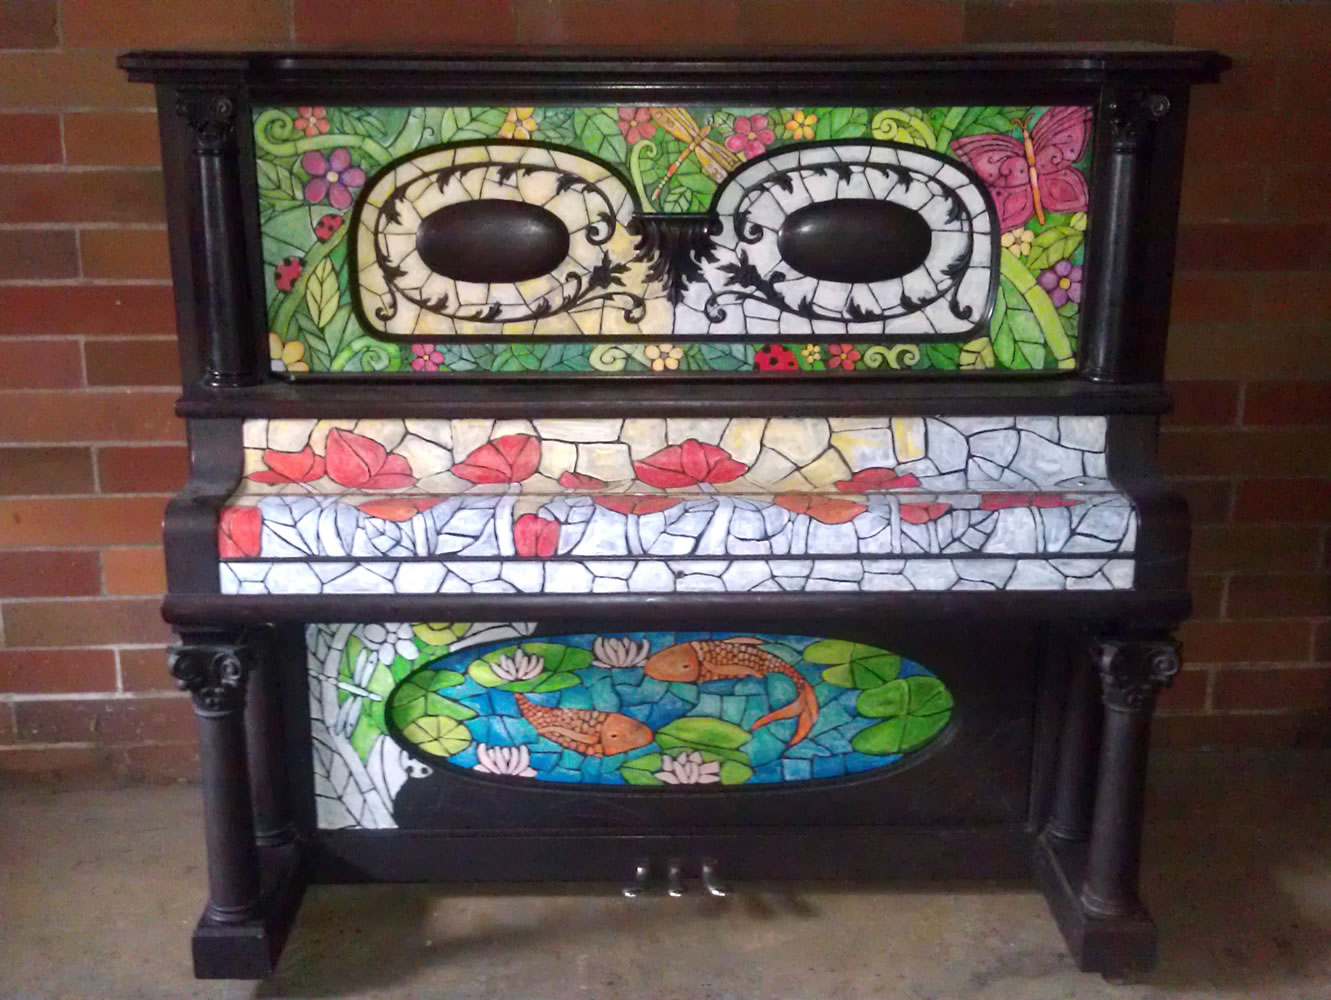 The &quot;Stained Glass&quot; piano, painted by artist Natalie Andrzejesk, took 60 hours to decorate. It will be on display at Riverview Tower Lobby, 900 Washington St.